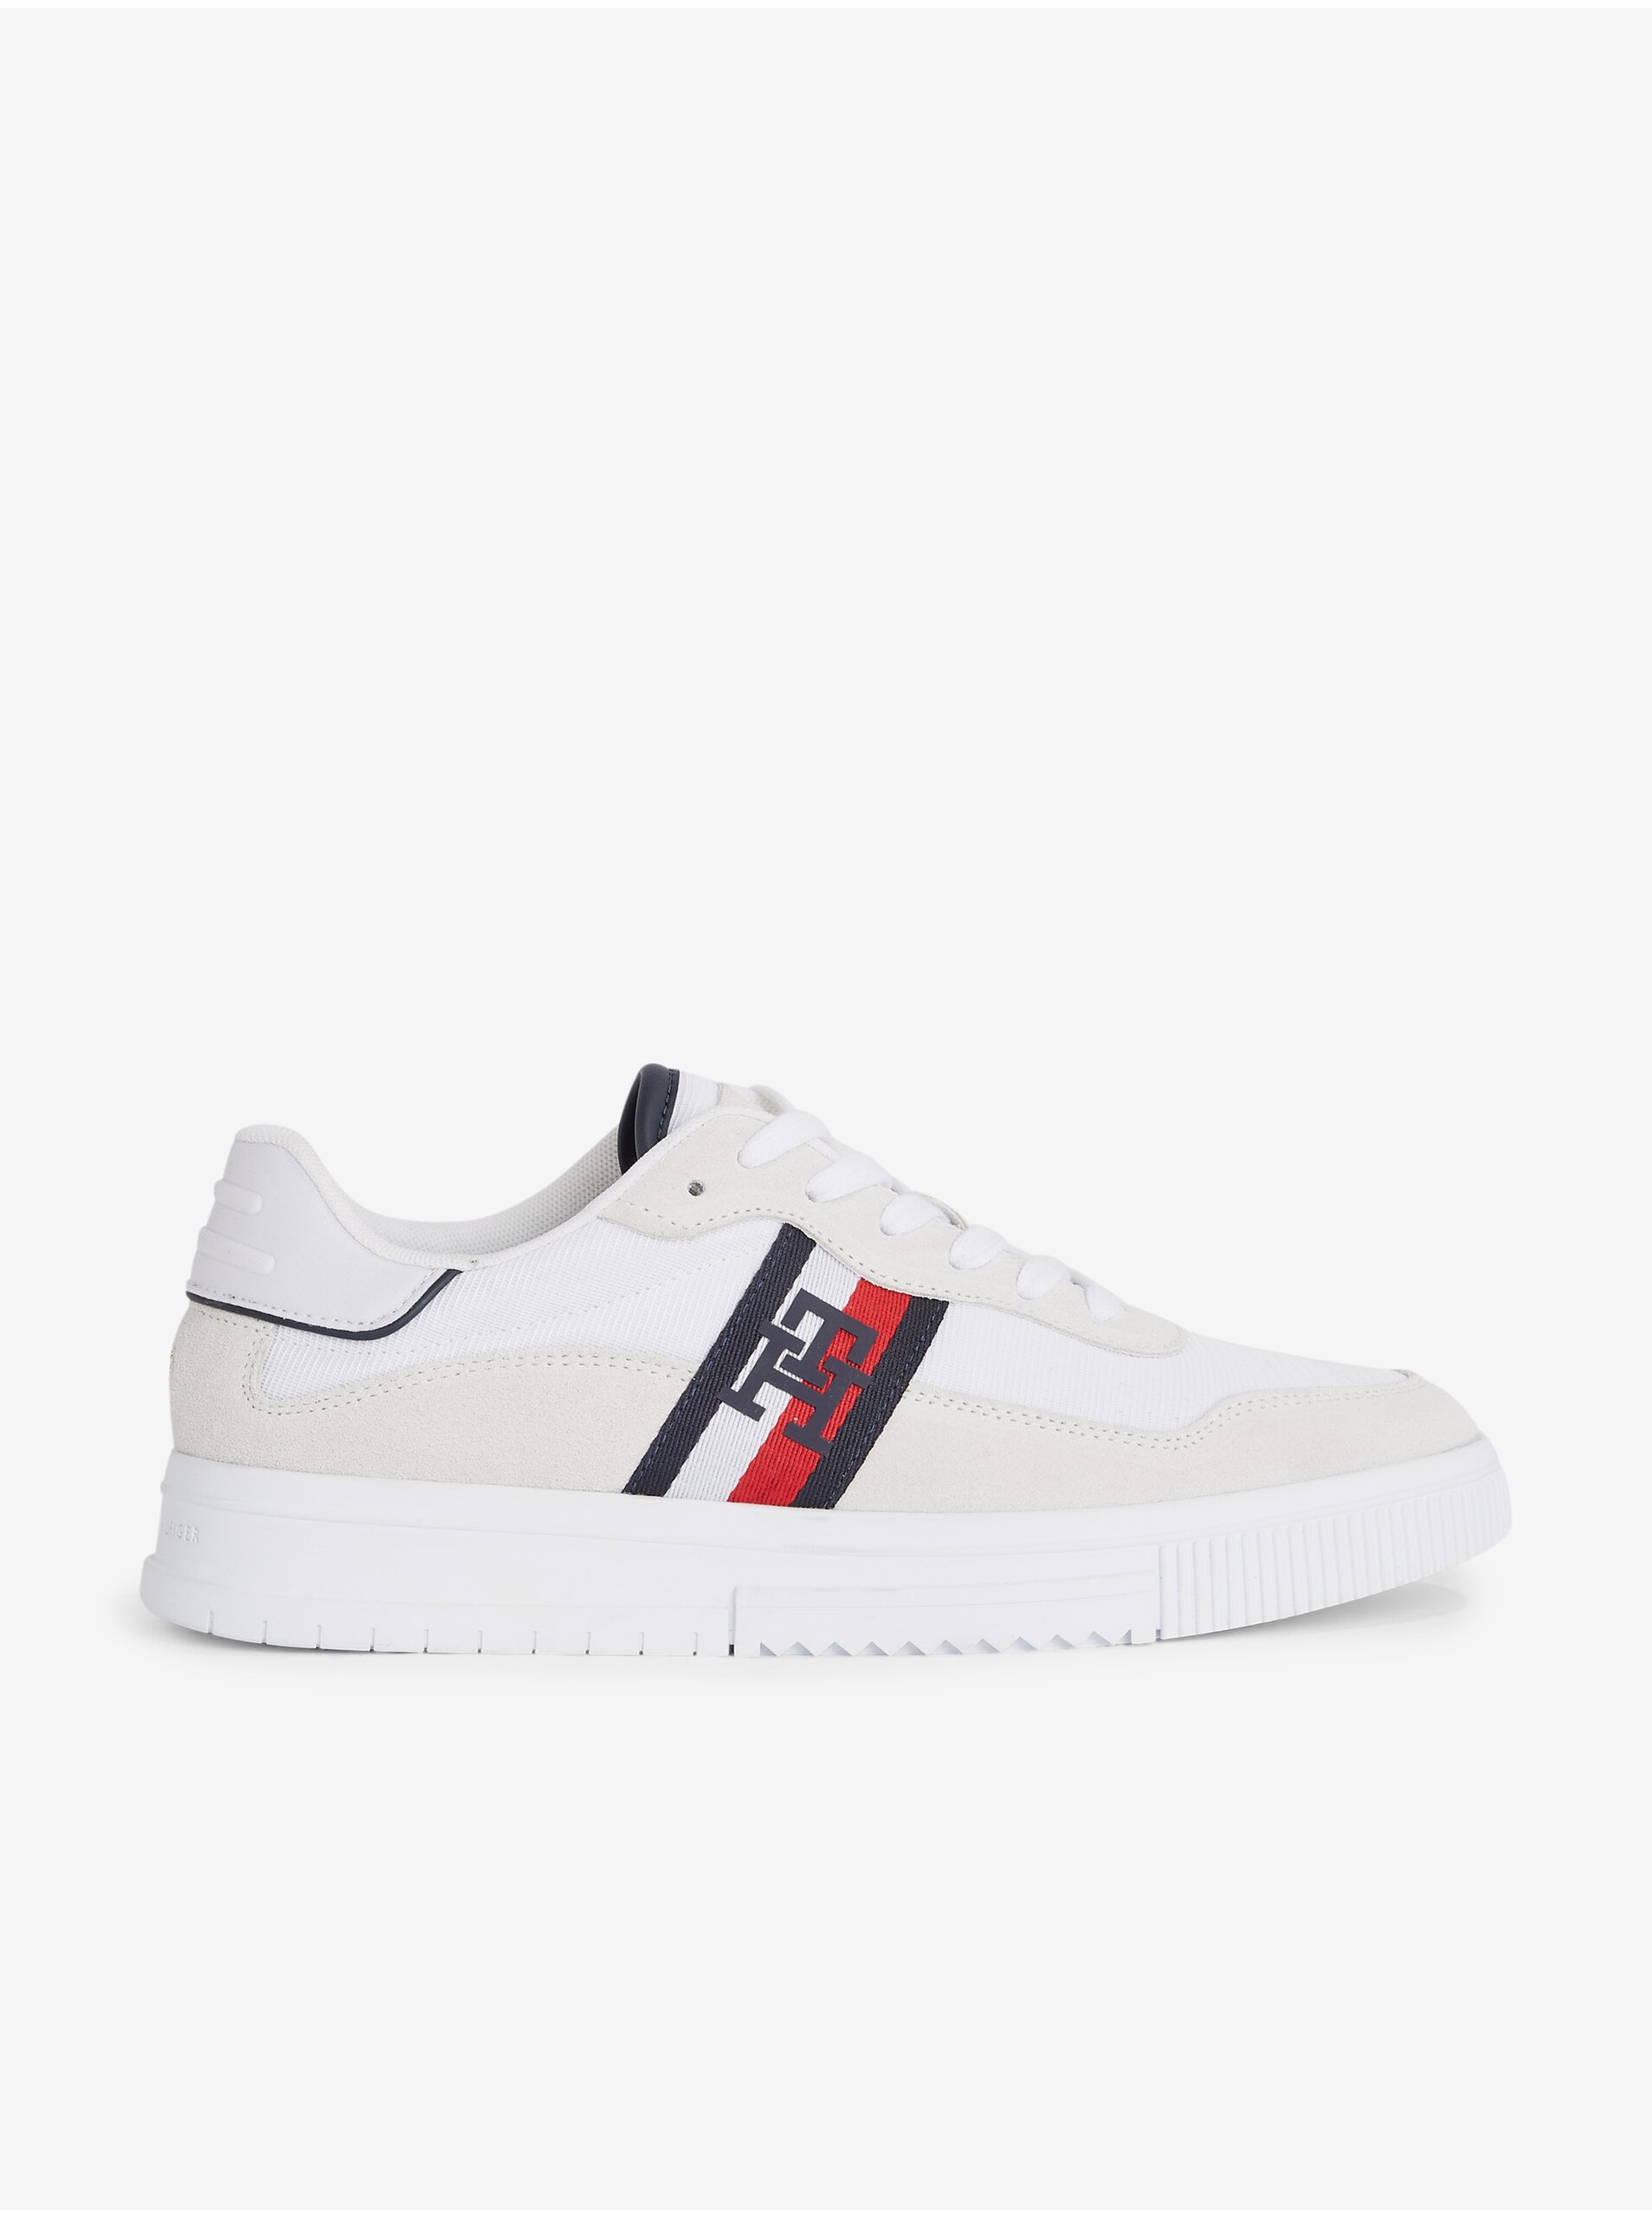 Men's cream sneakers with suede details Tommy Hilfiger - Men's